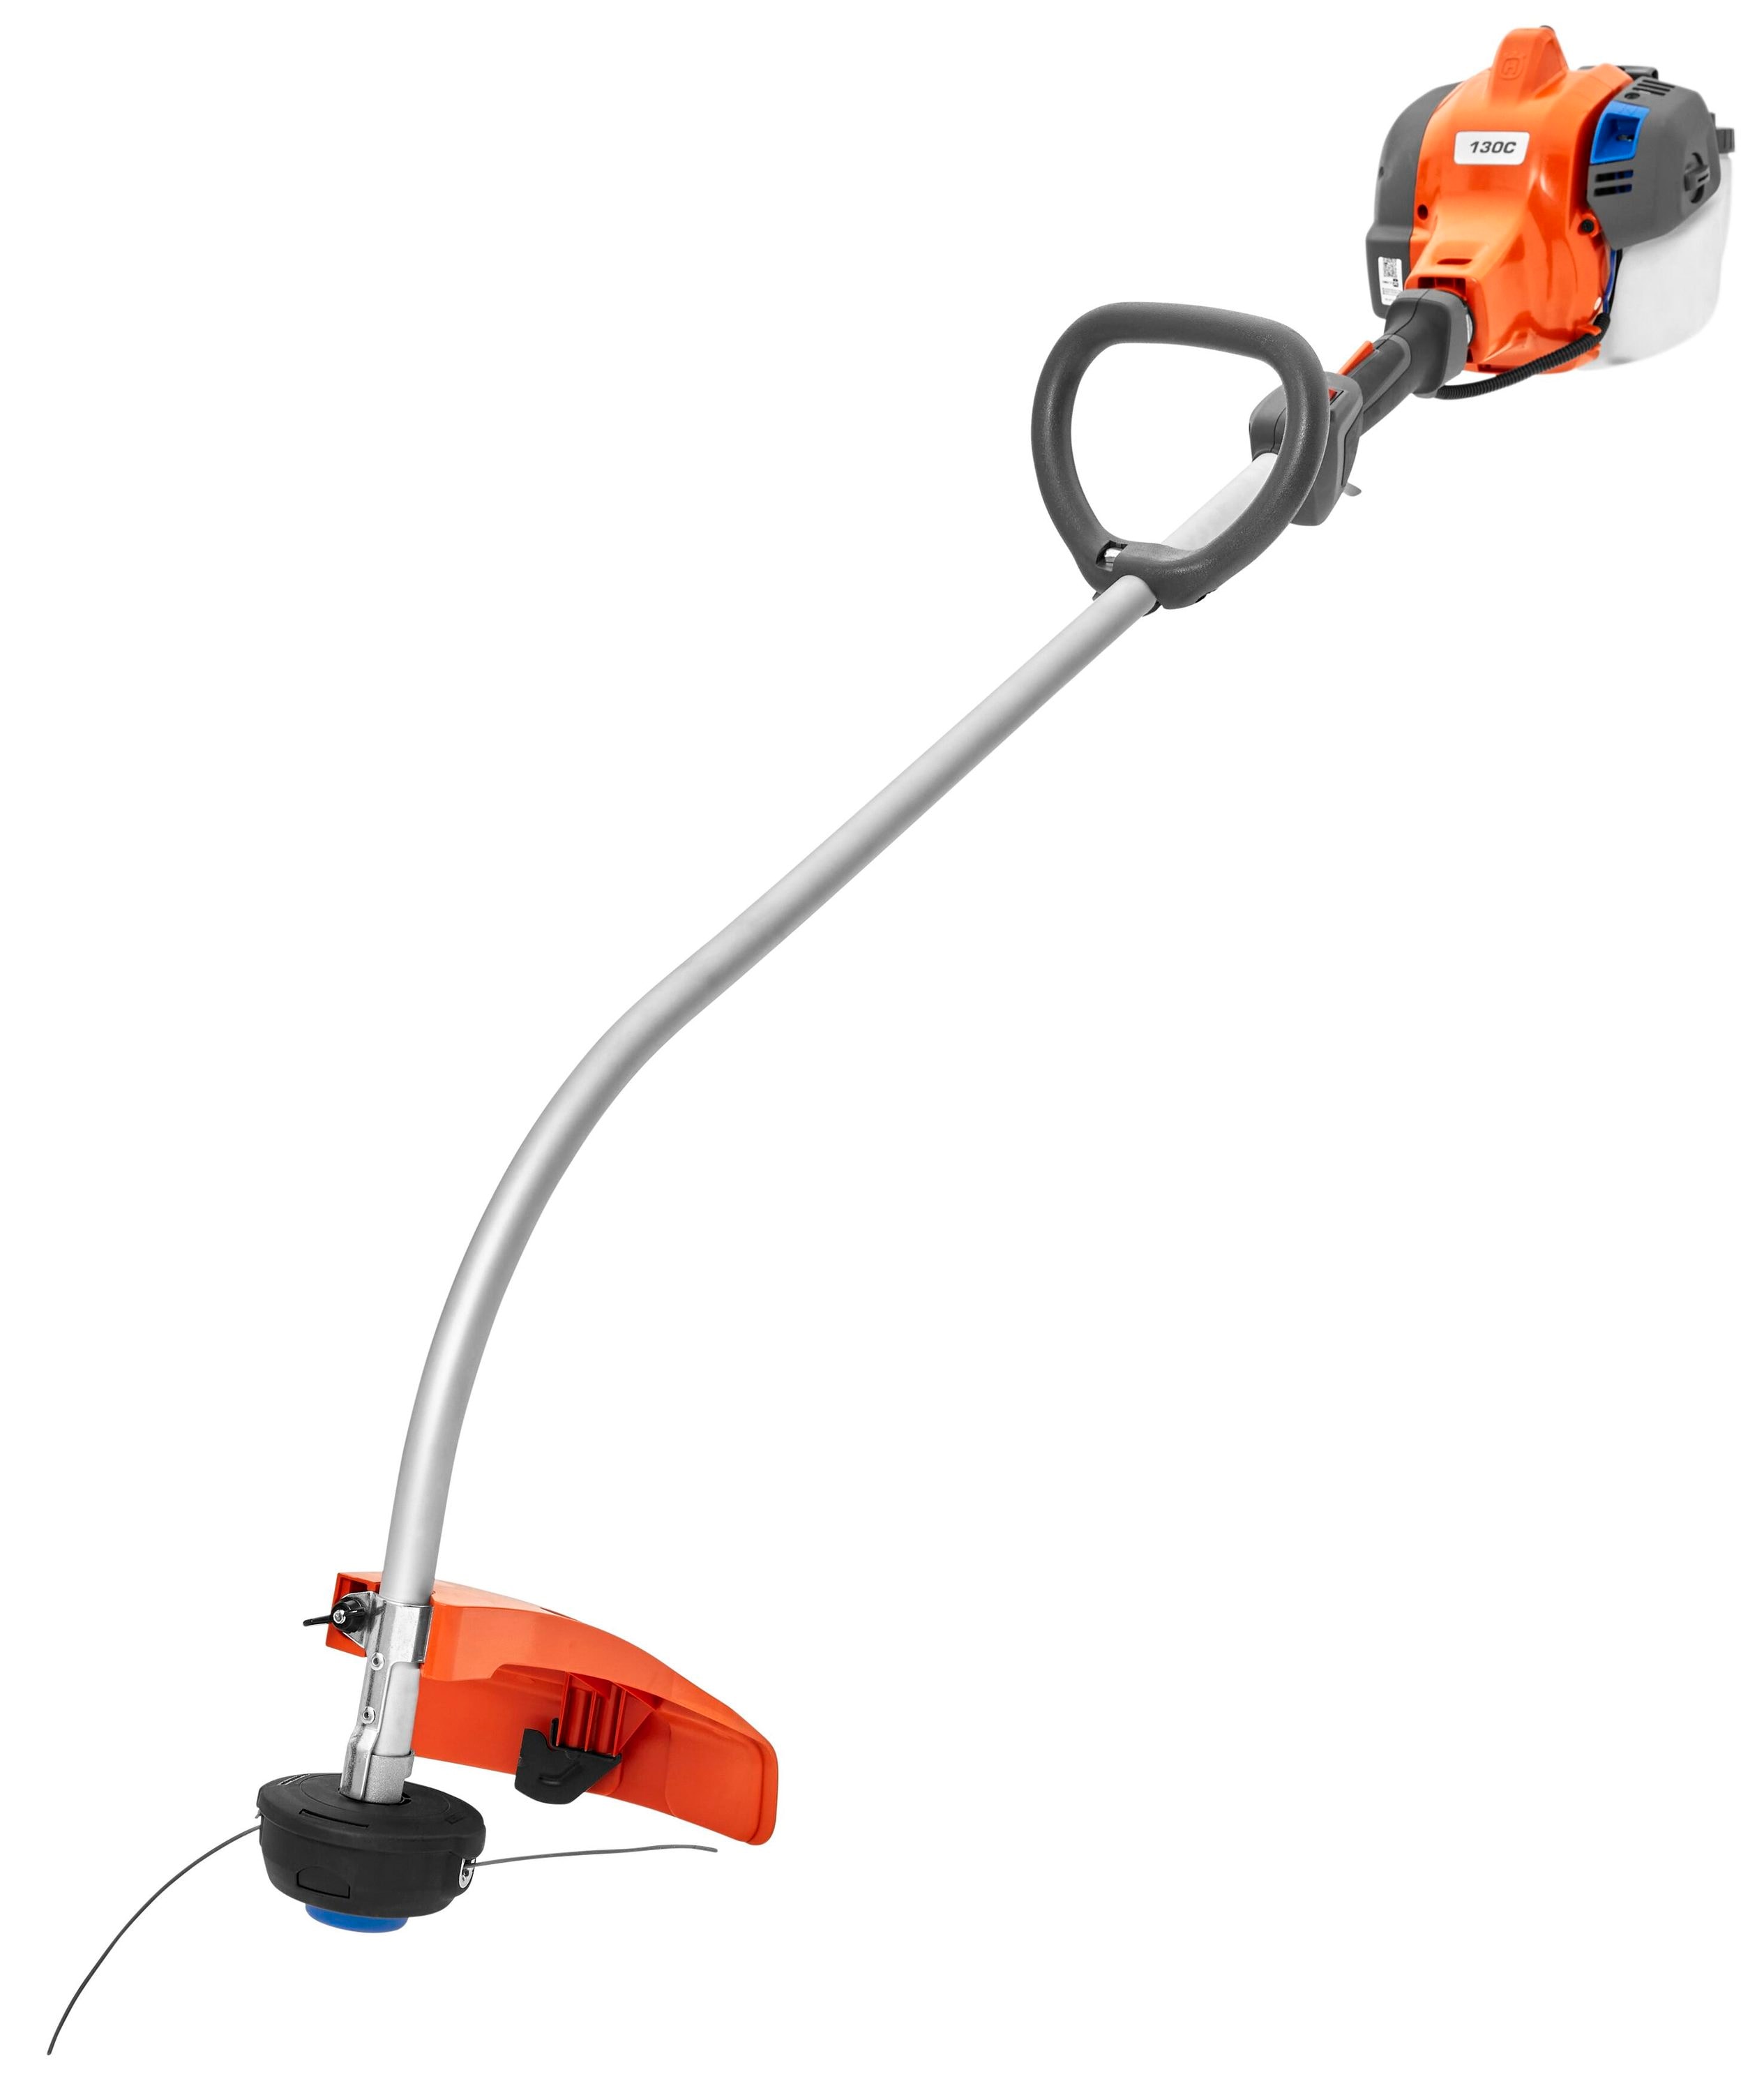 Husqvarna 130C 28-cc 2-cycle 17-in Curved Gas String Trimmer the String Trimmers Lowes.com